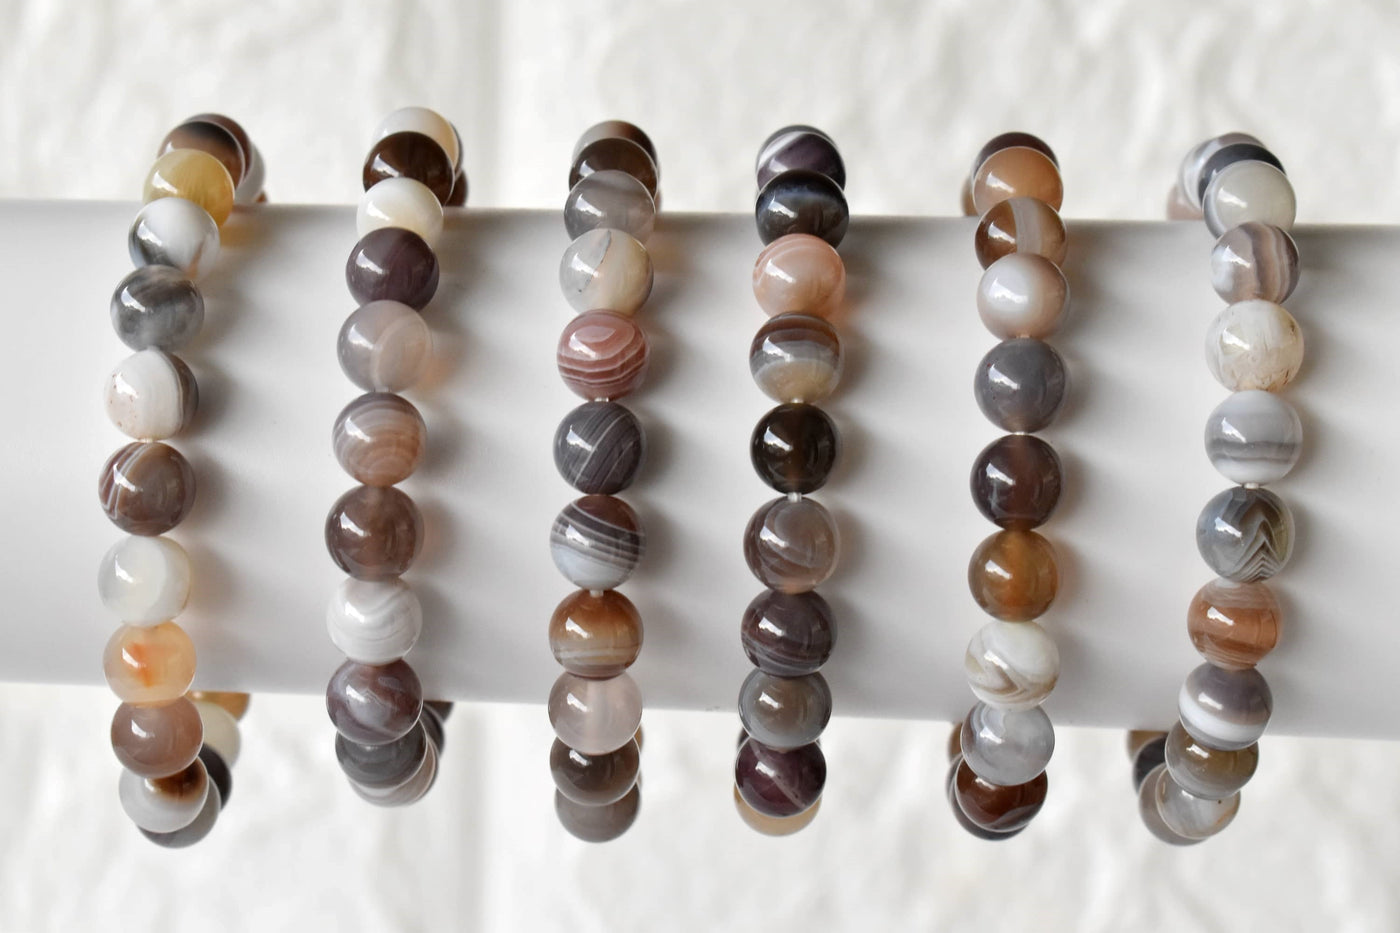 Botswana Agate Bracelet (Alignment With The Higher Self and Inspiration)